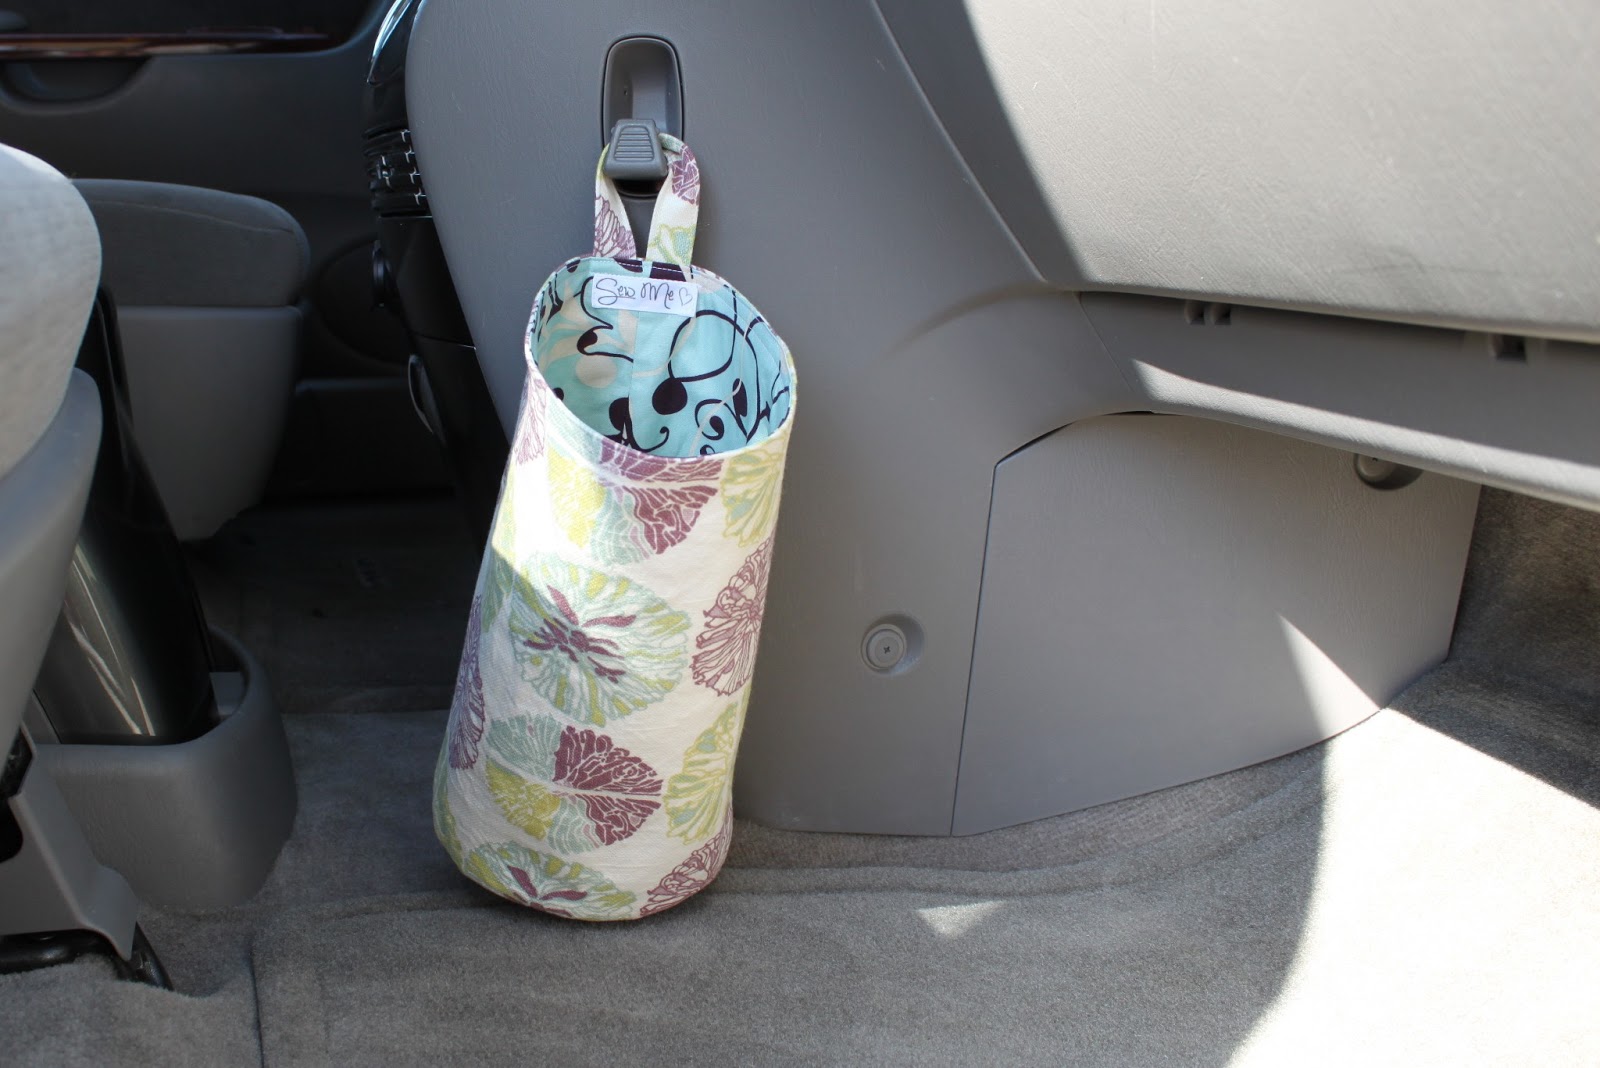 How to Sew a DIY Car Trash Can - Free Sewing Pattern